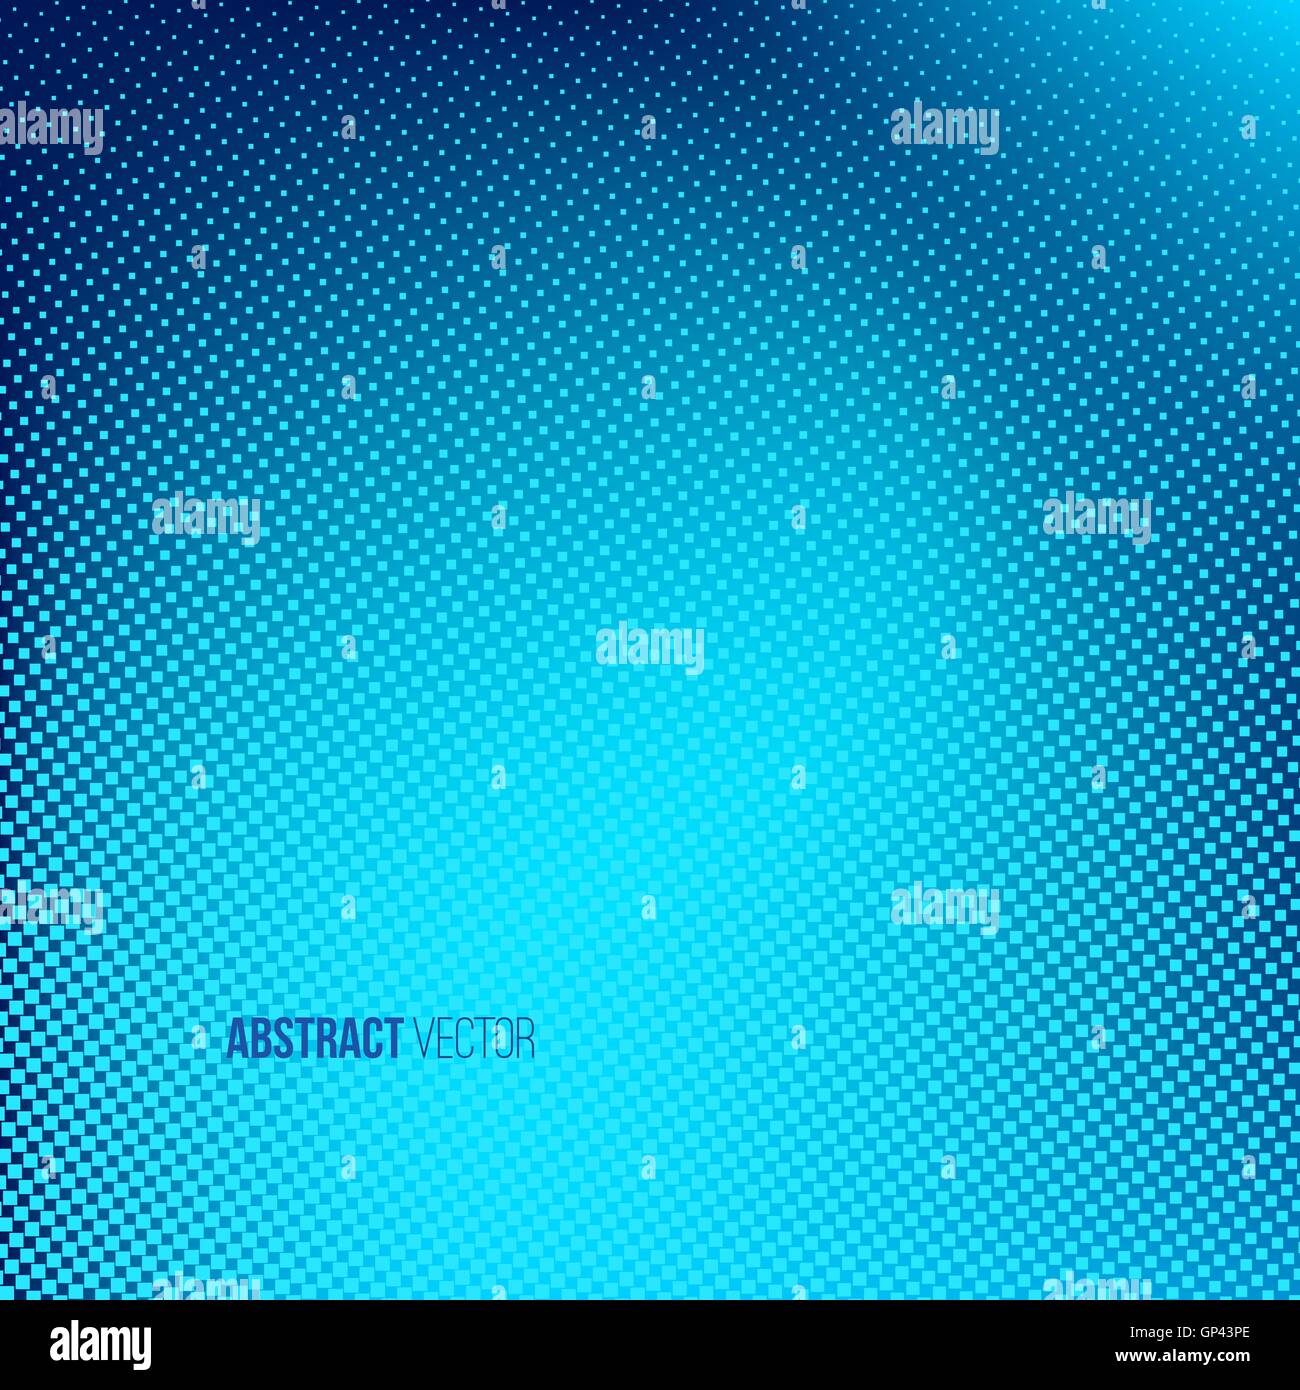 Blue abstract halftone background. Creative vector illustration Stock Vector